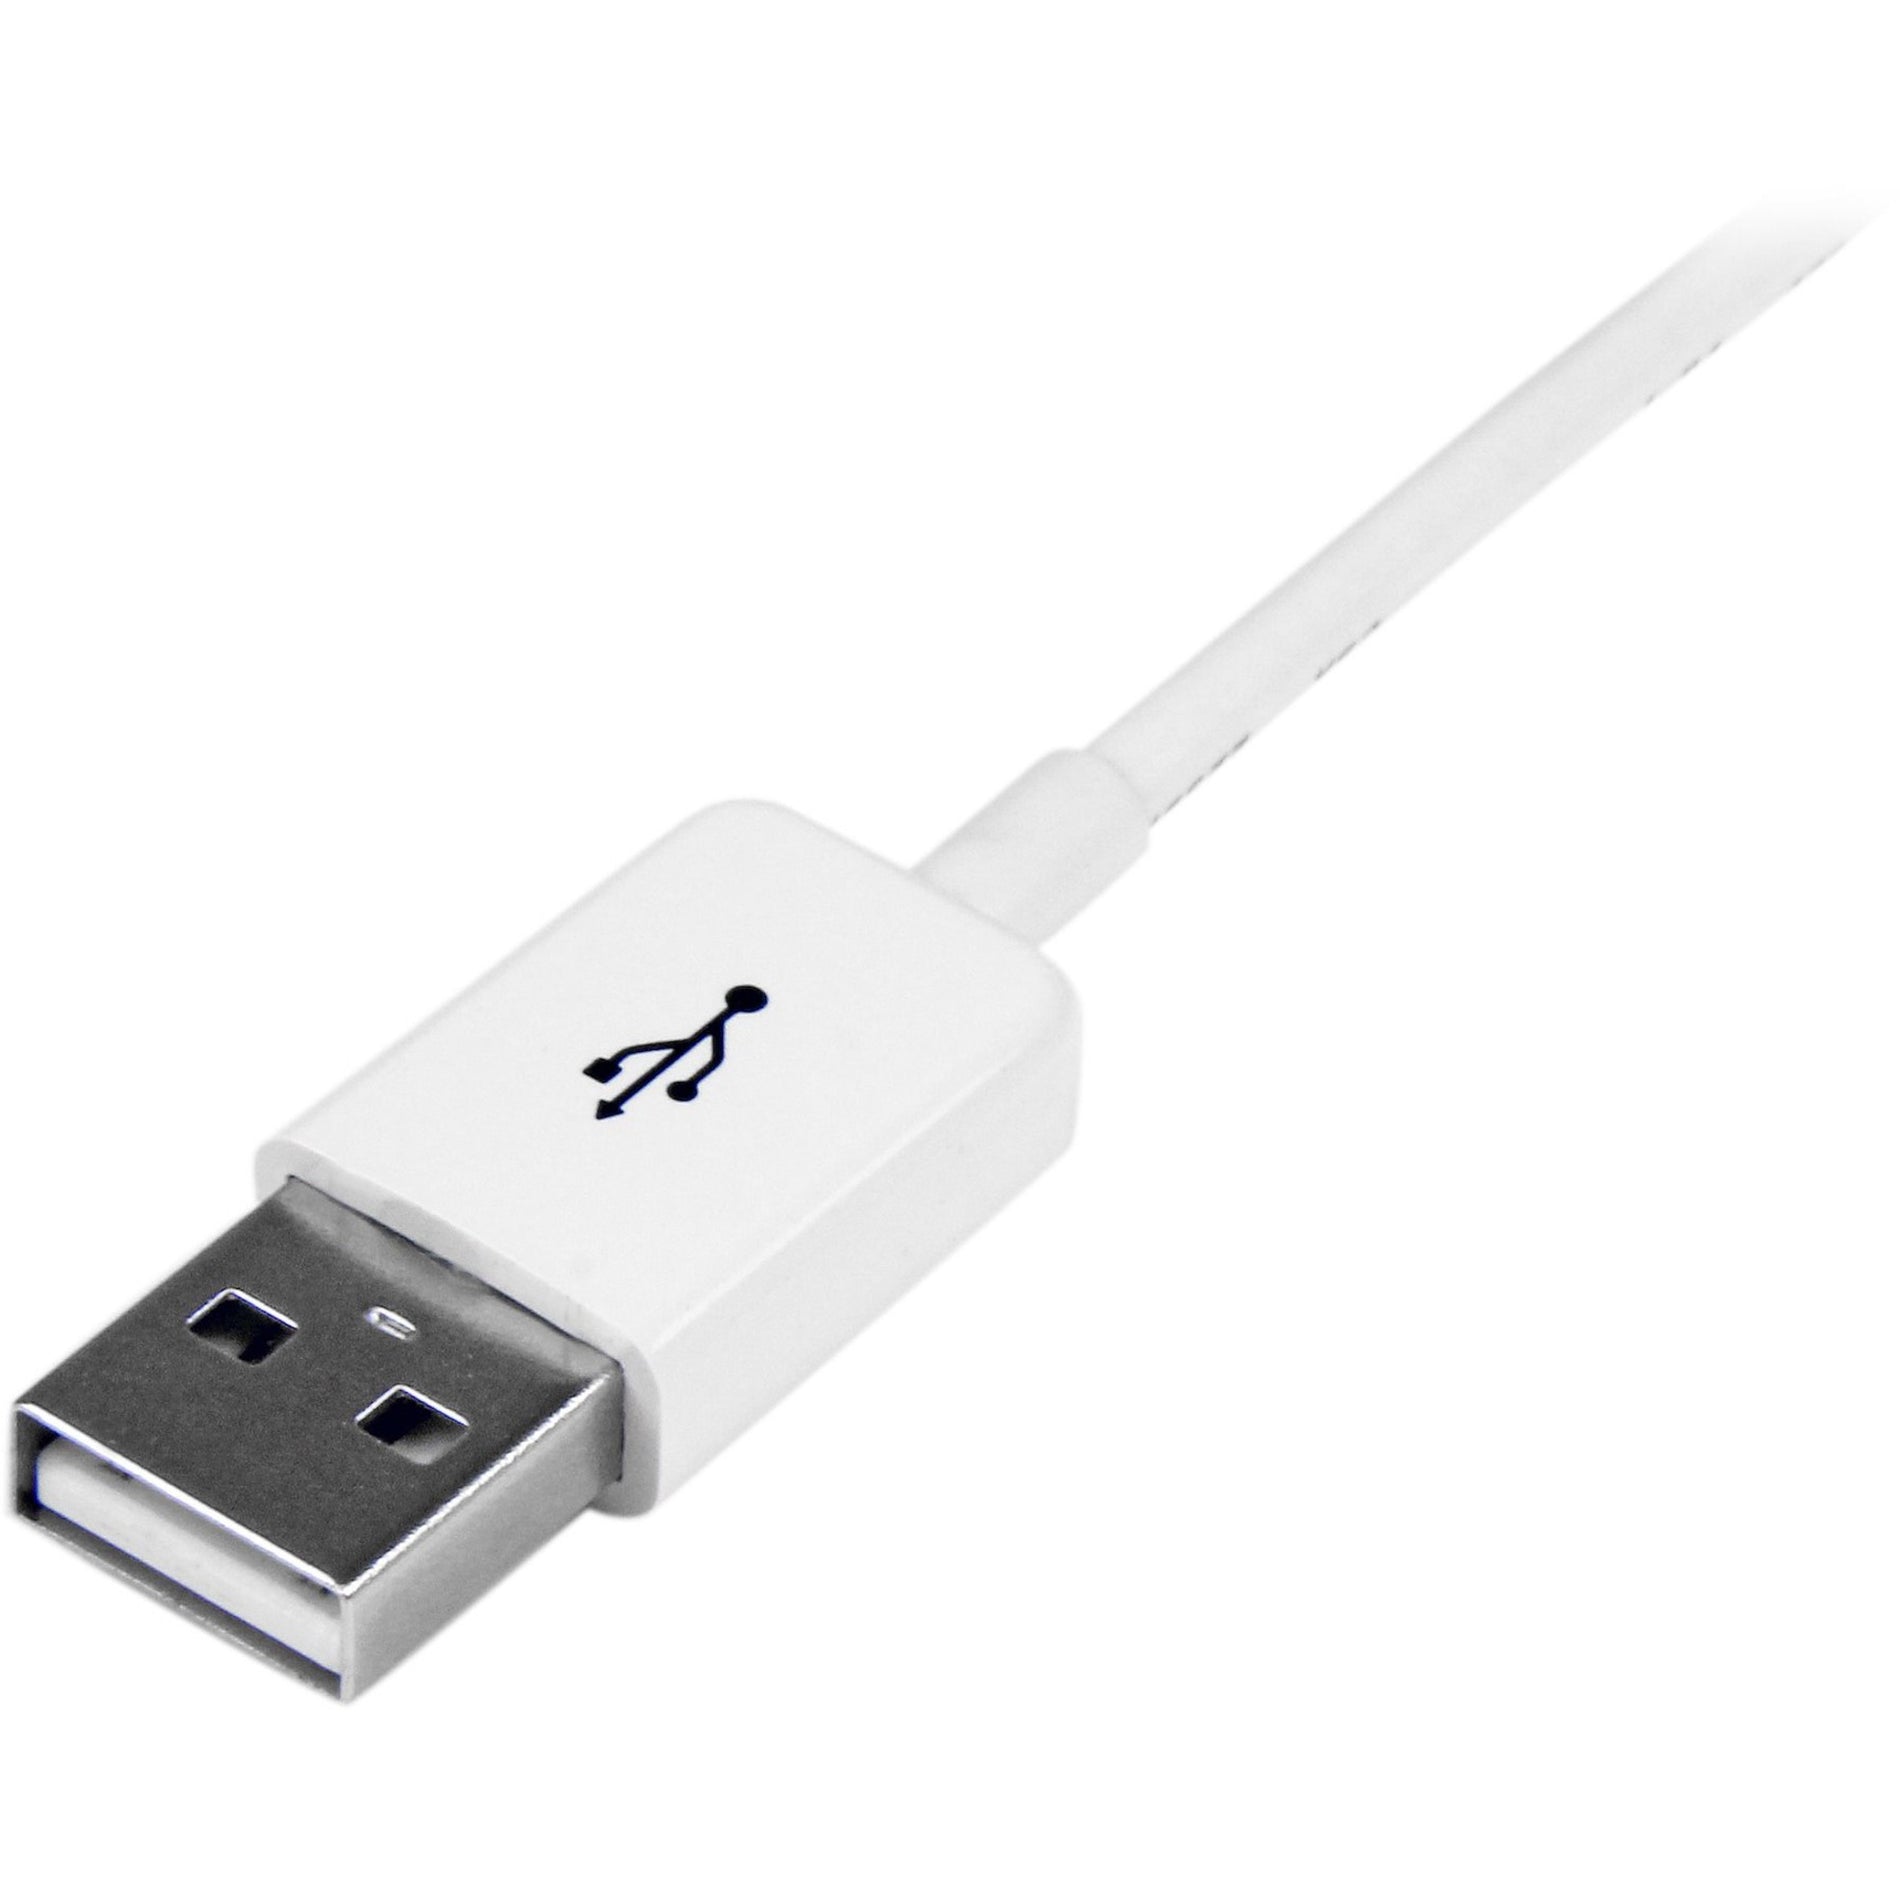 StarTech.com USBEXTPAA3MW 3m White USB 2.0 Extension Cable A to A - M/F, Molded, Flexible, Strain Relief, 480 Mbit/s Data Transfer Rate